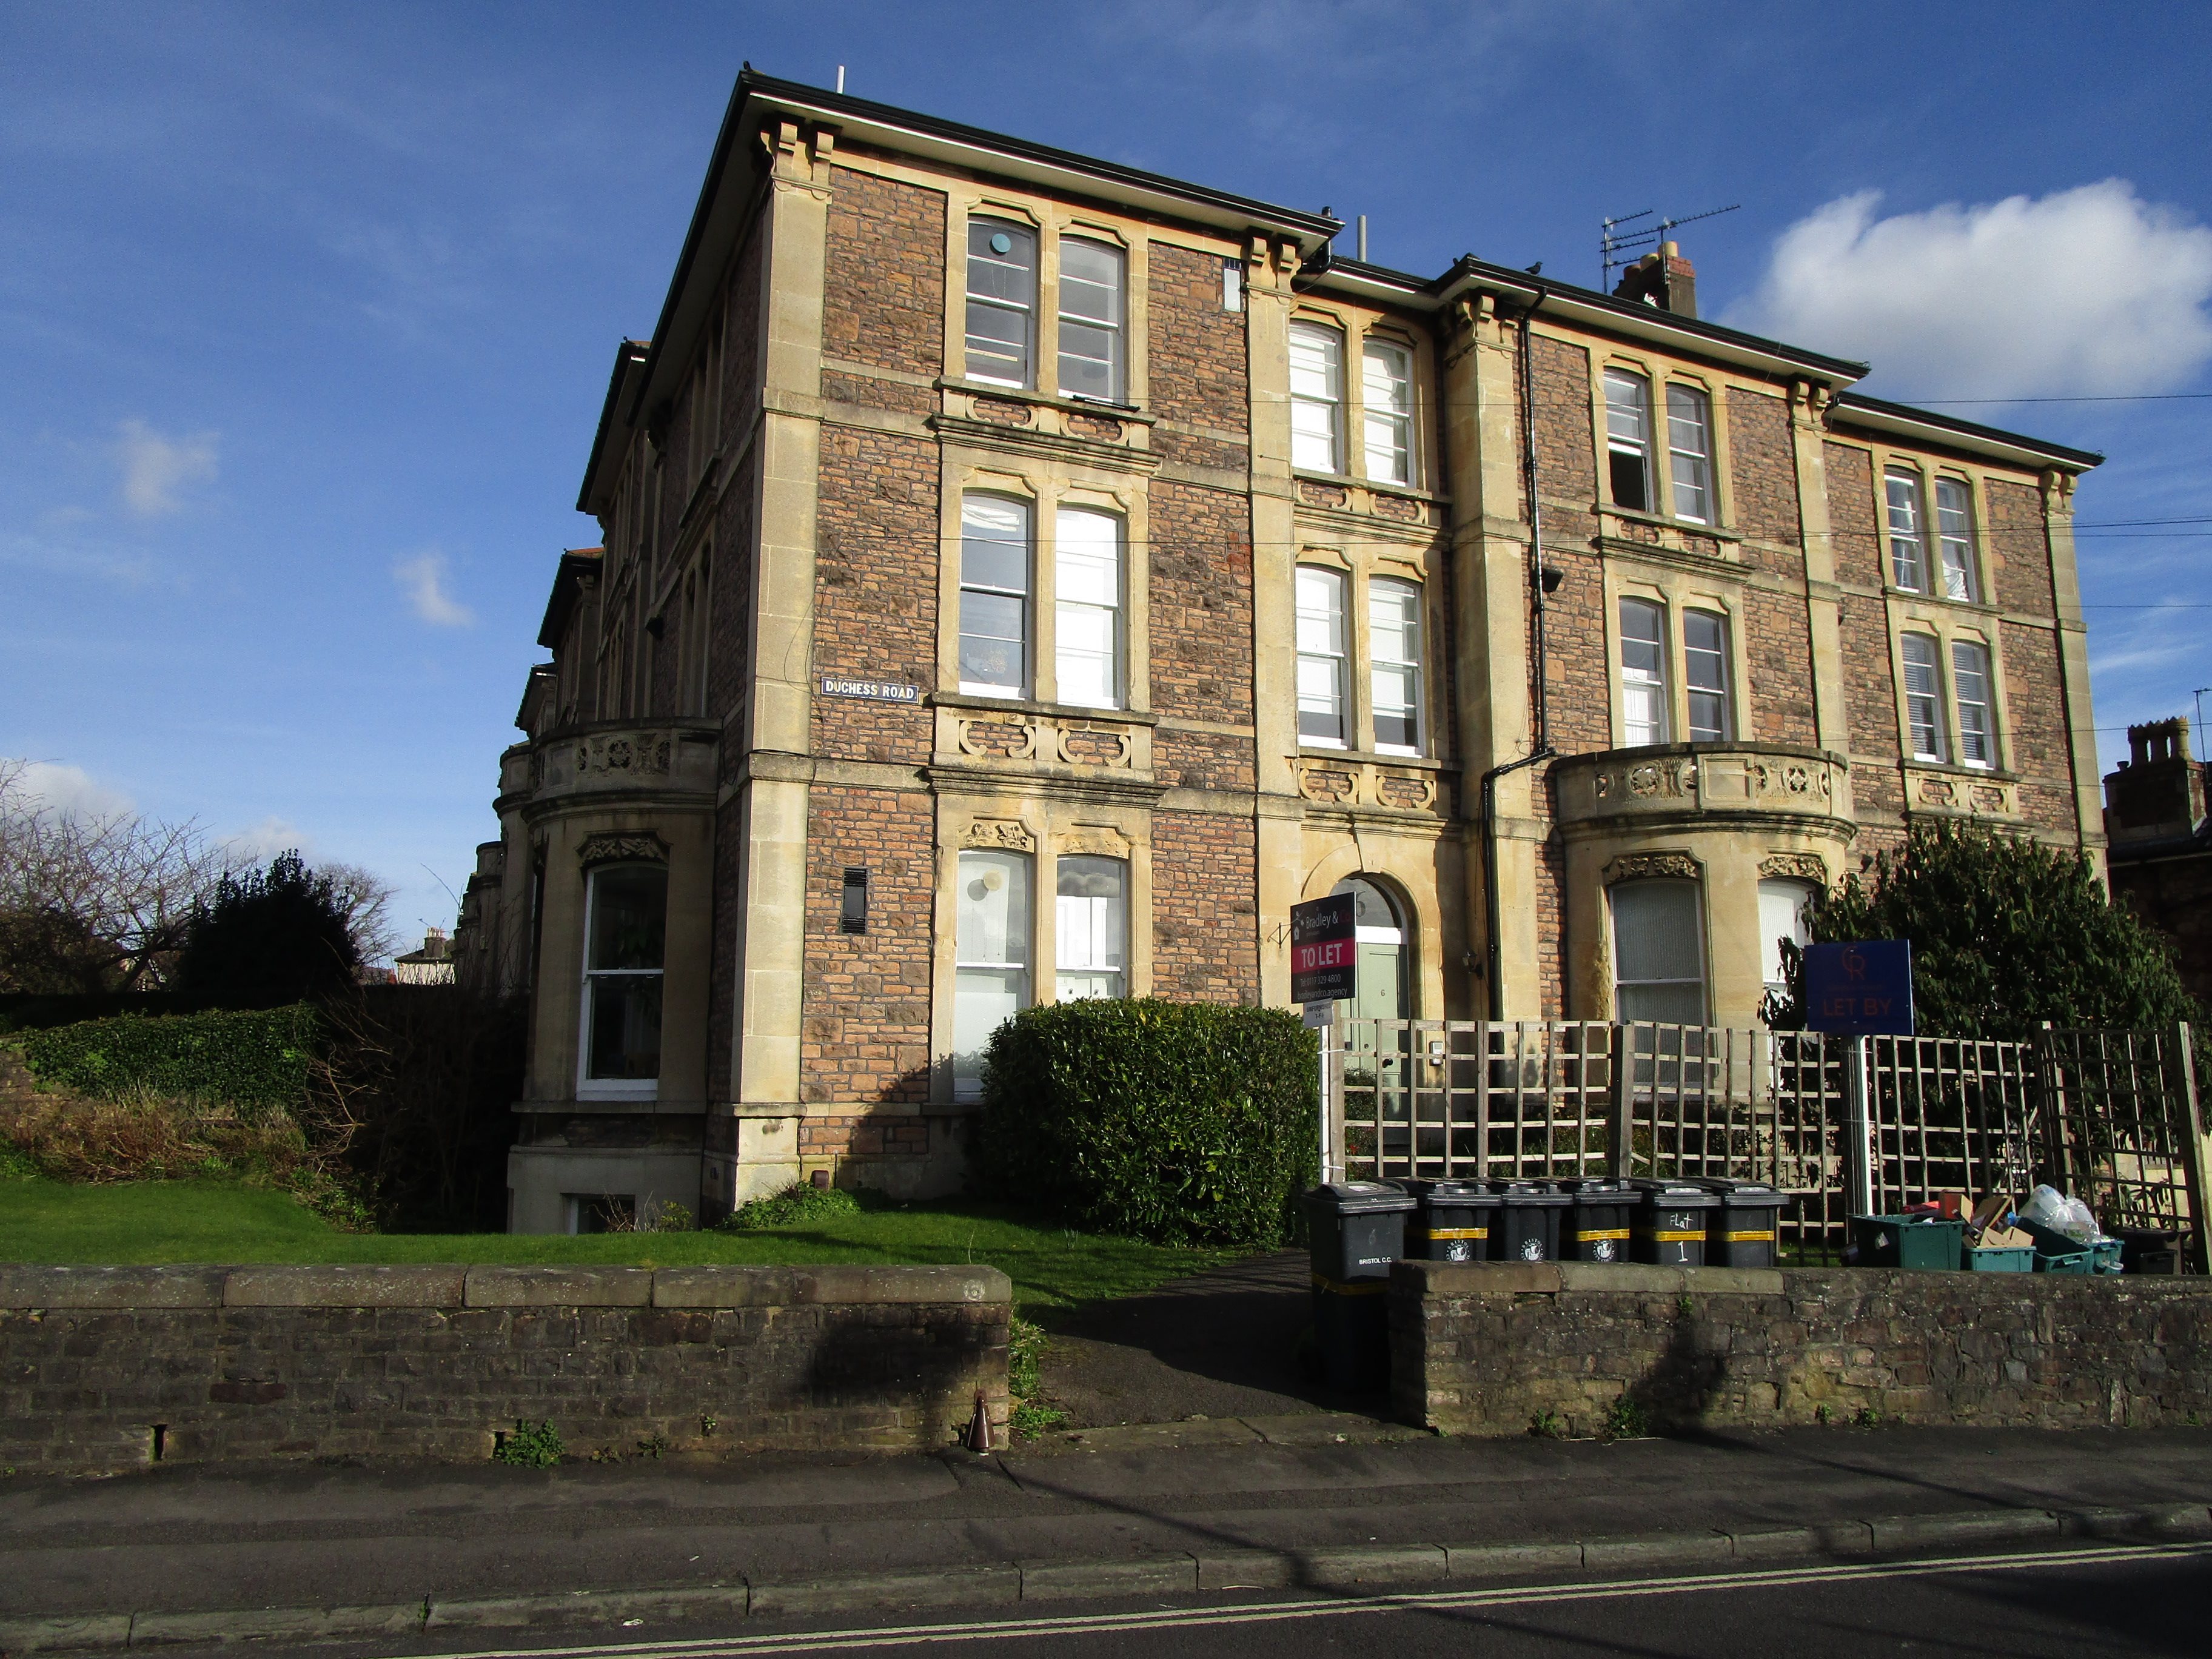 1 bed flat to rent - Property Image 1